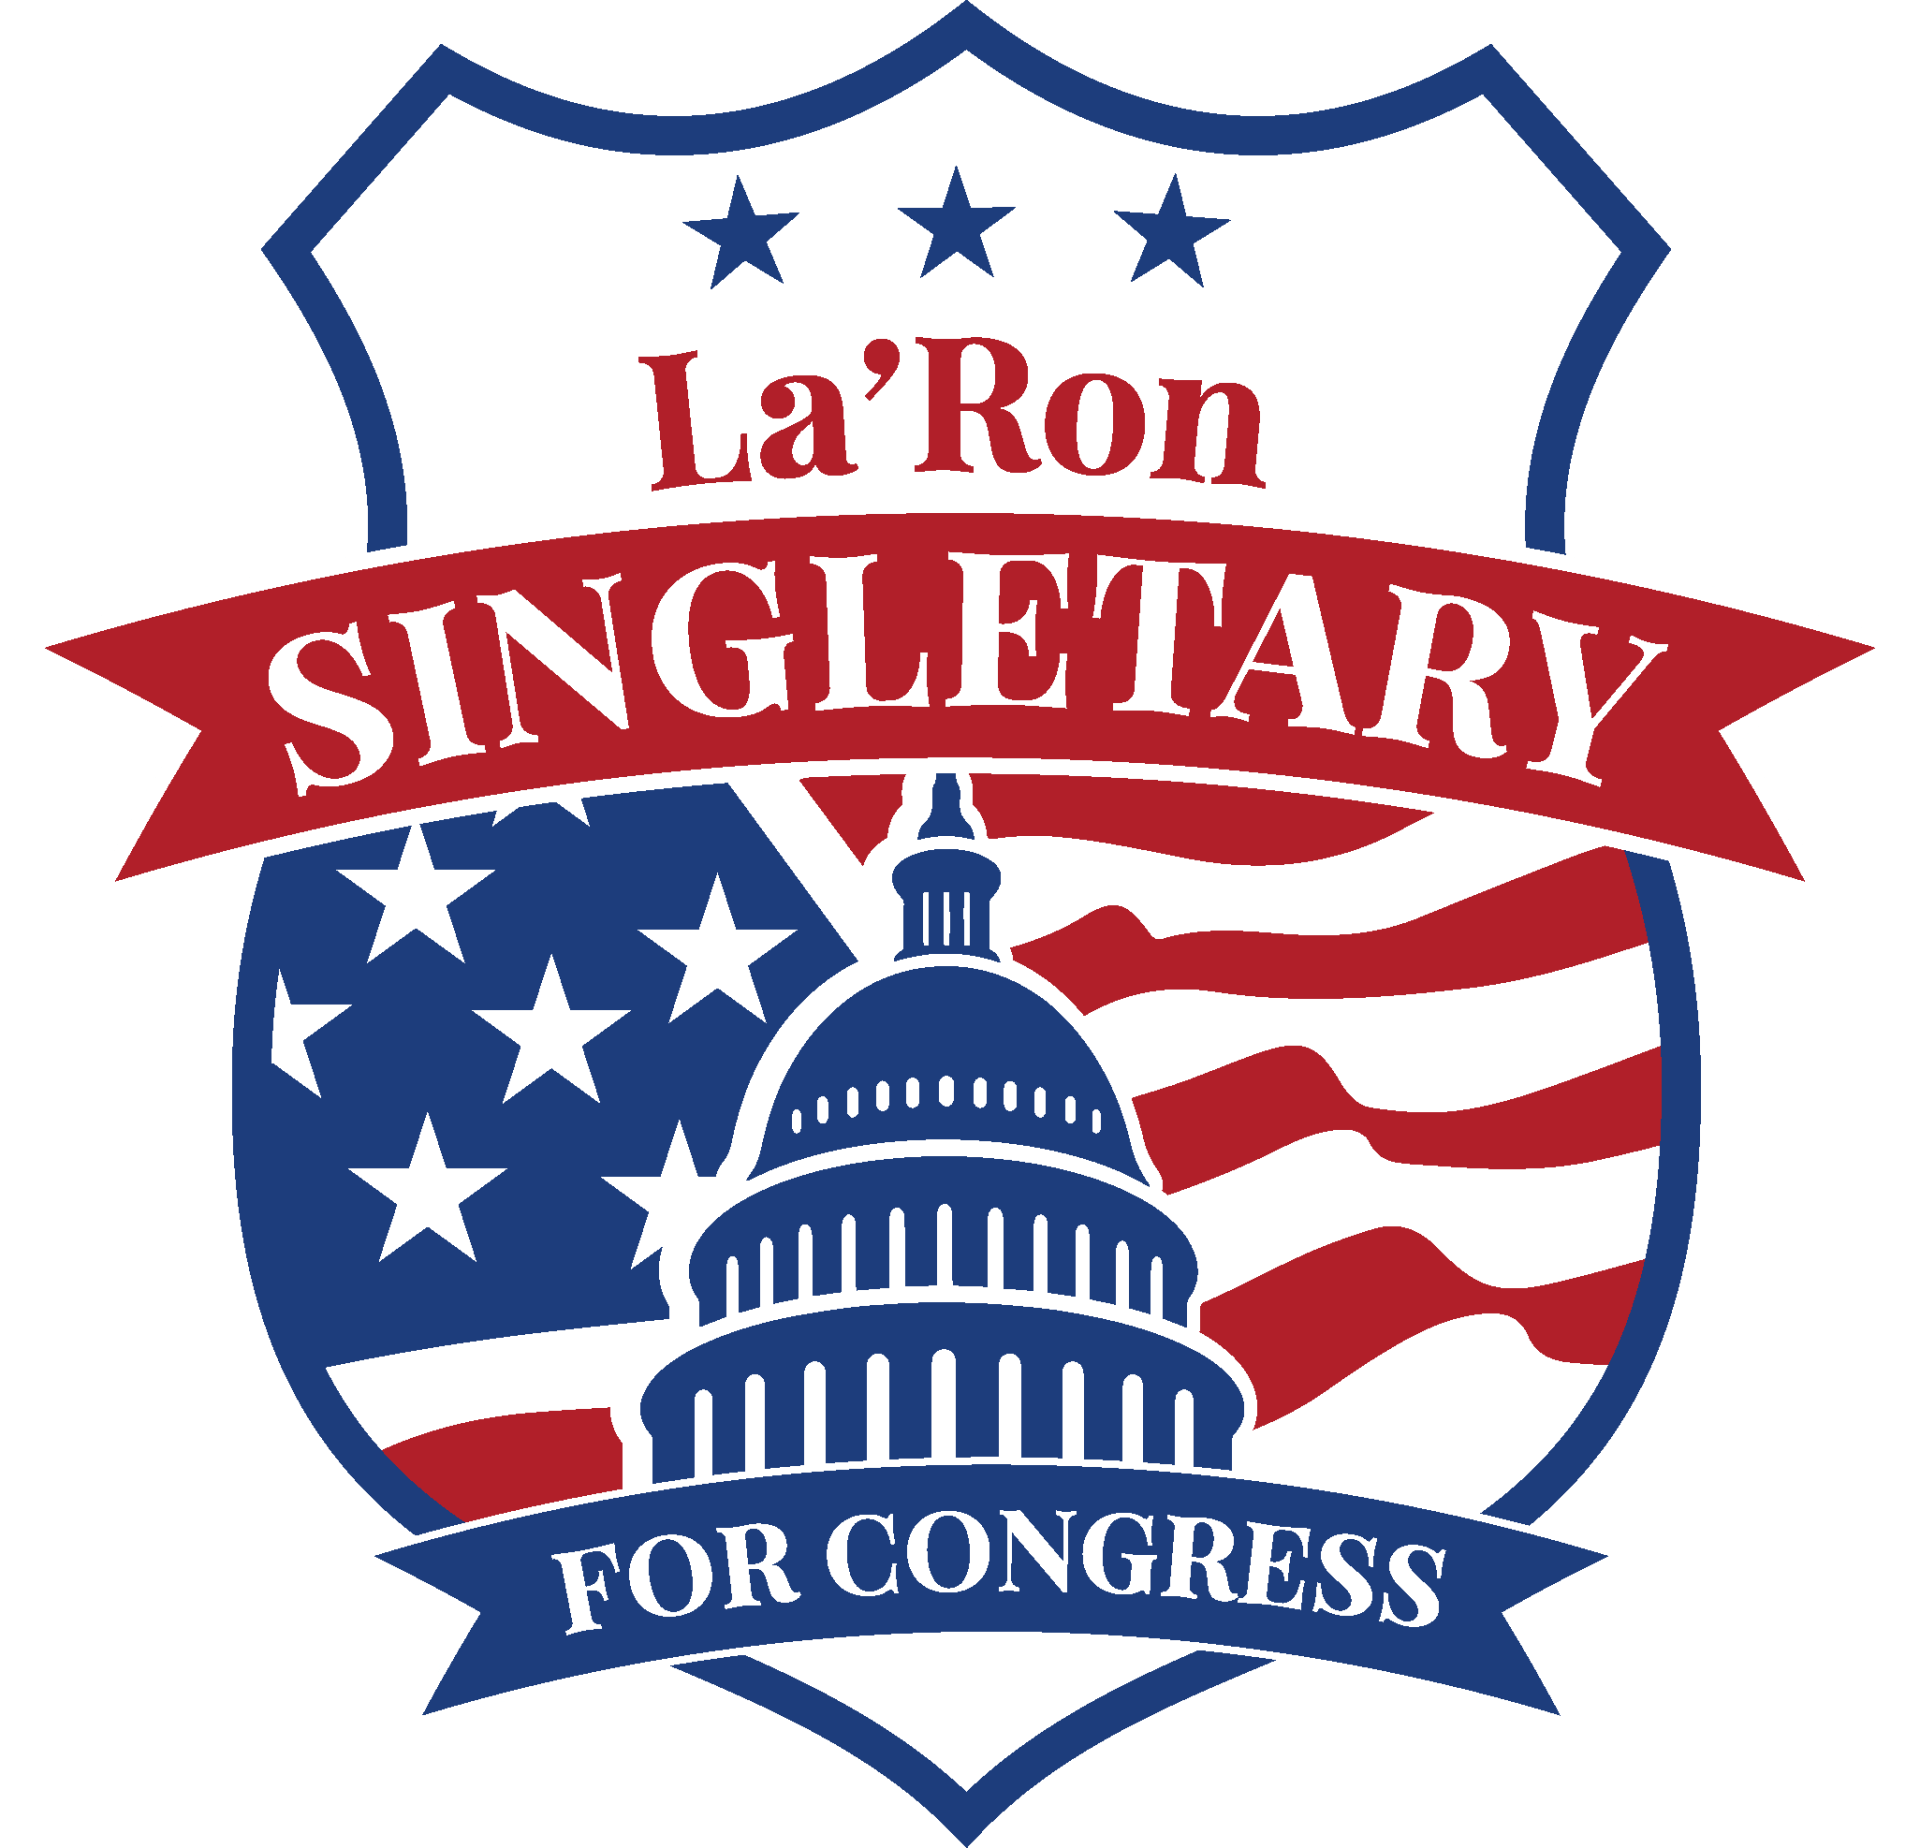 Former Police Chief and Congressional Candidate La�Ron Singletary (R-NY)